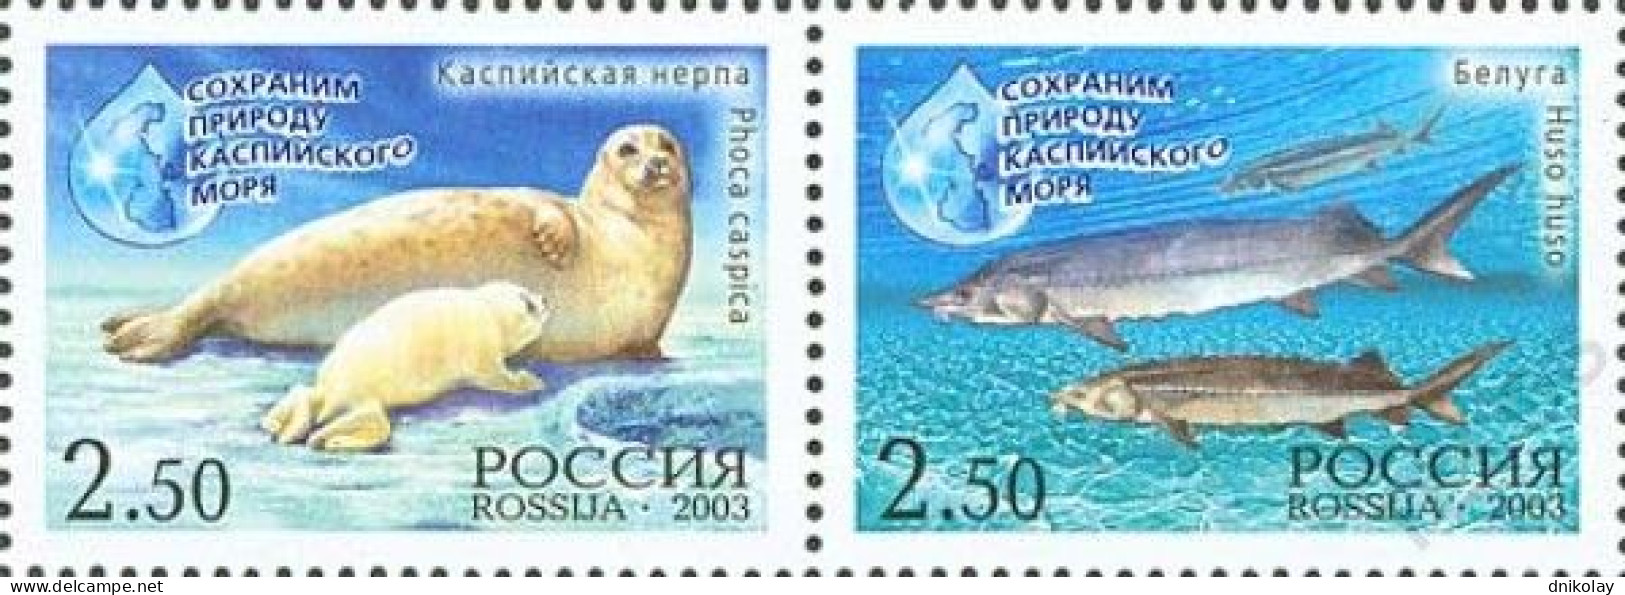 2003 1112 Russia Fauna - Russian-Iranian Joint Issue MNH - Unused Stamps